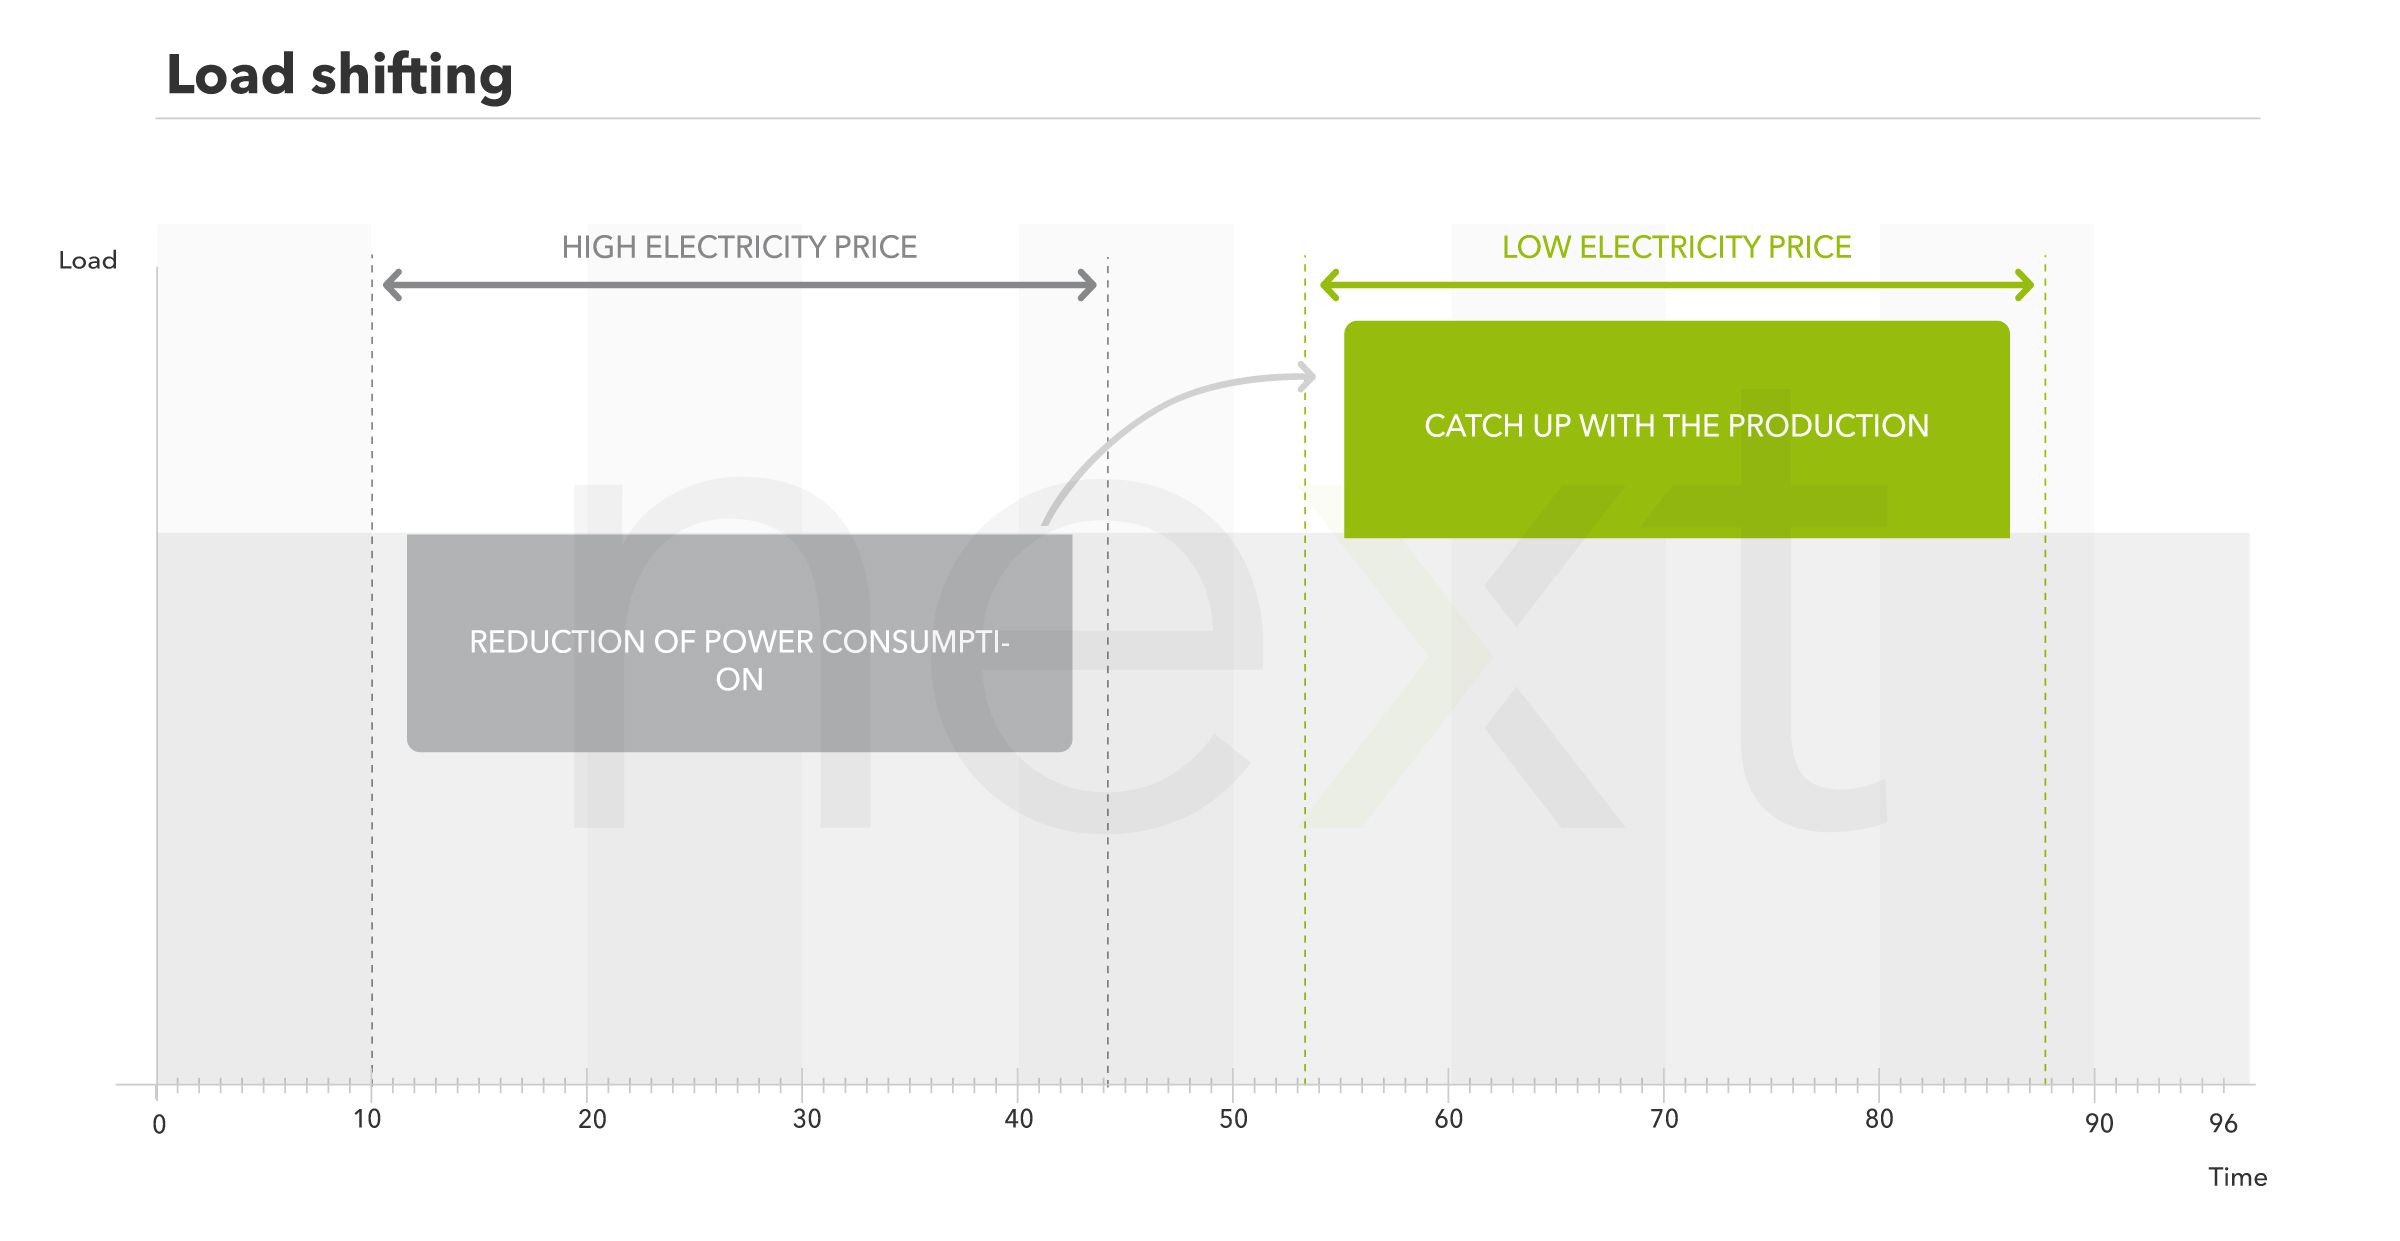 Load shifting following the electricity prices explained.